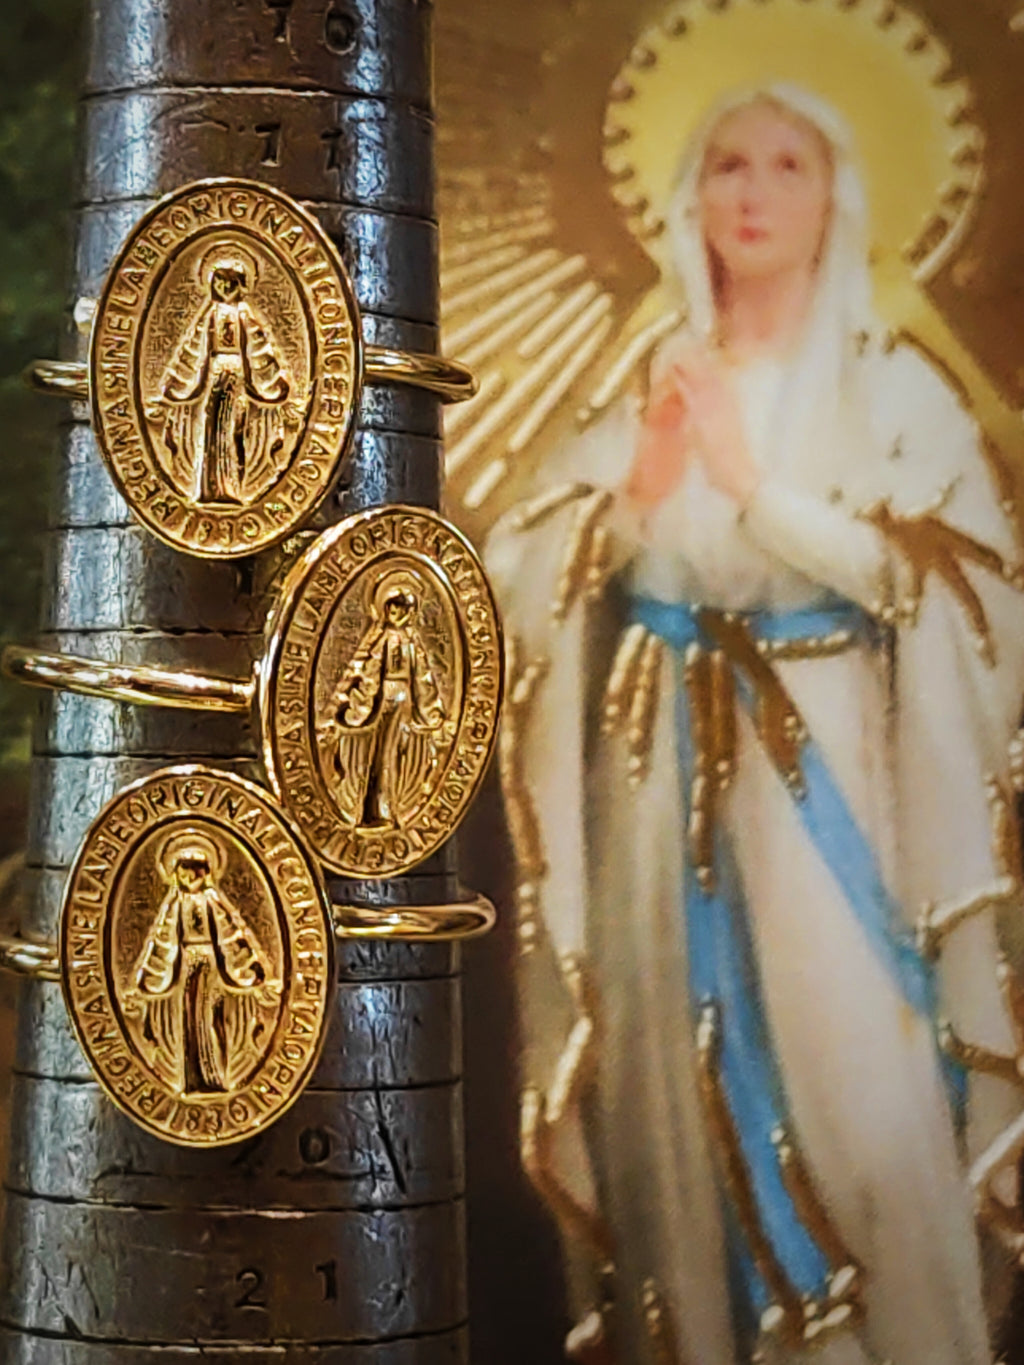 These gorgeous Virgin Mary rings are worn to help shield from harm,,made in silver then coated in lashings of bold gold!

Plated rings must be treated with care, to keep the plate rich for as long as possible remove when washing, applying creams, using detergents etc. 

